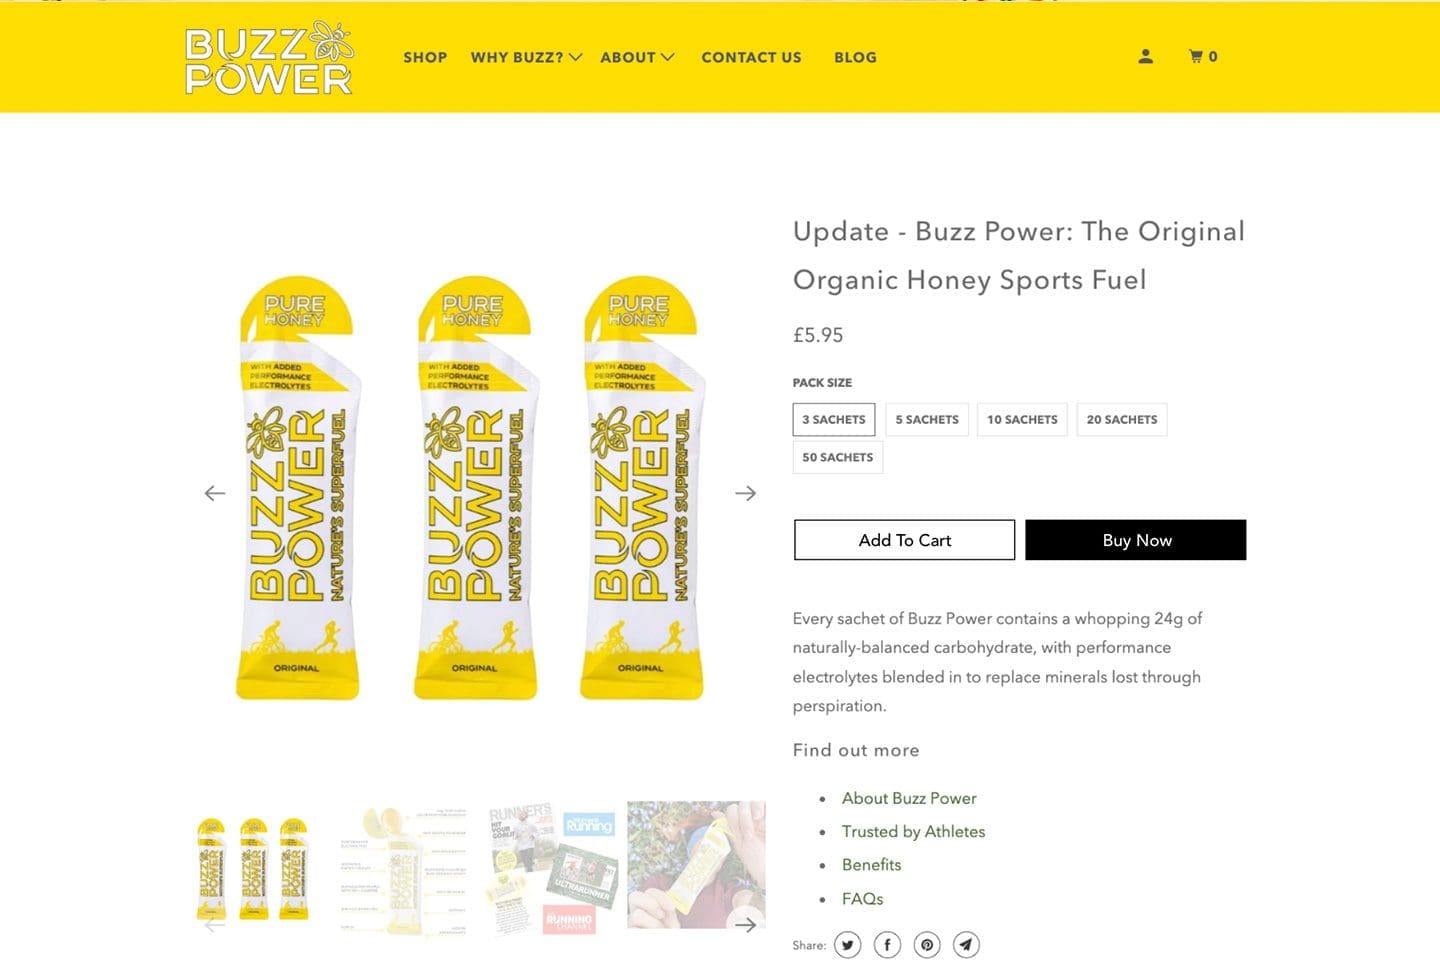 Improving the Shopify Conversion Rate of Buzz Power's Product Page